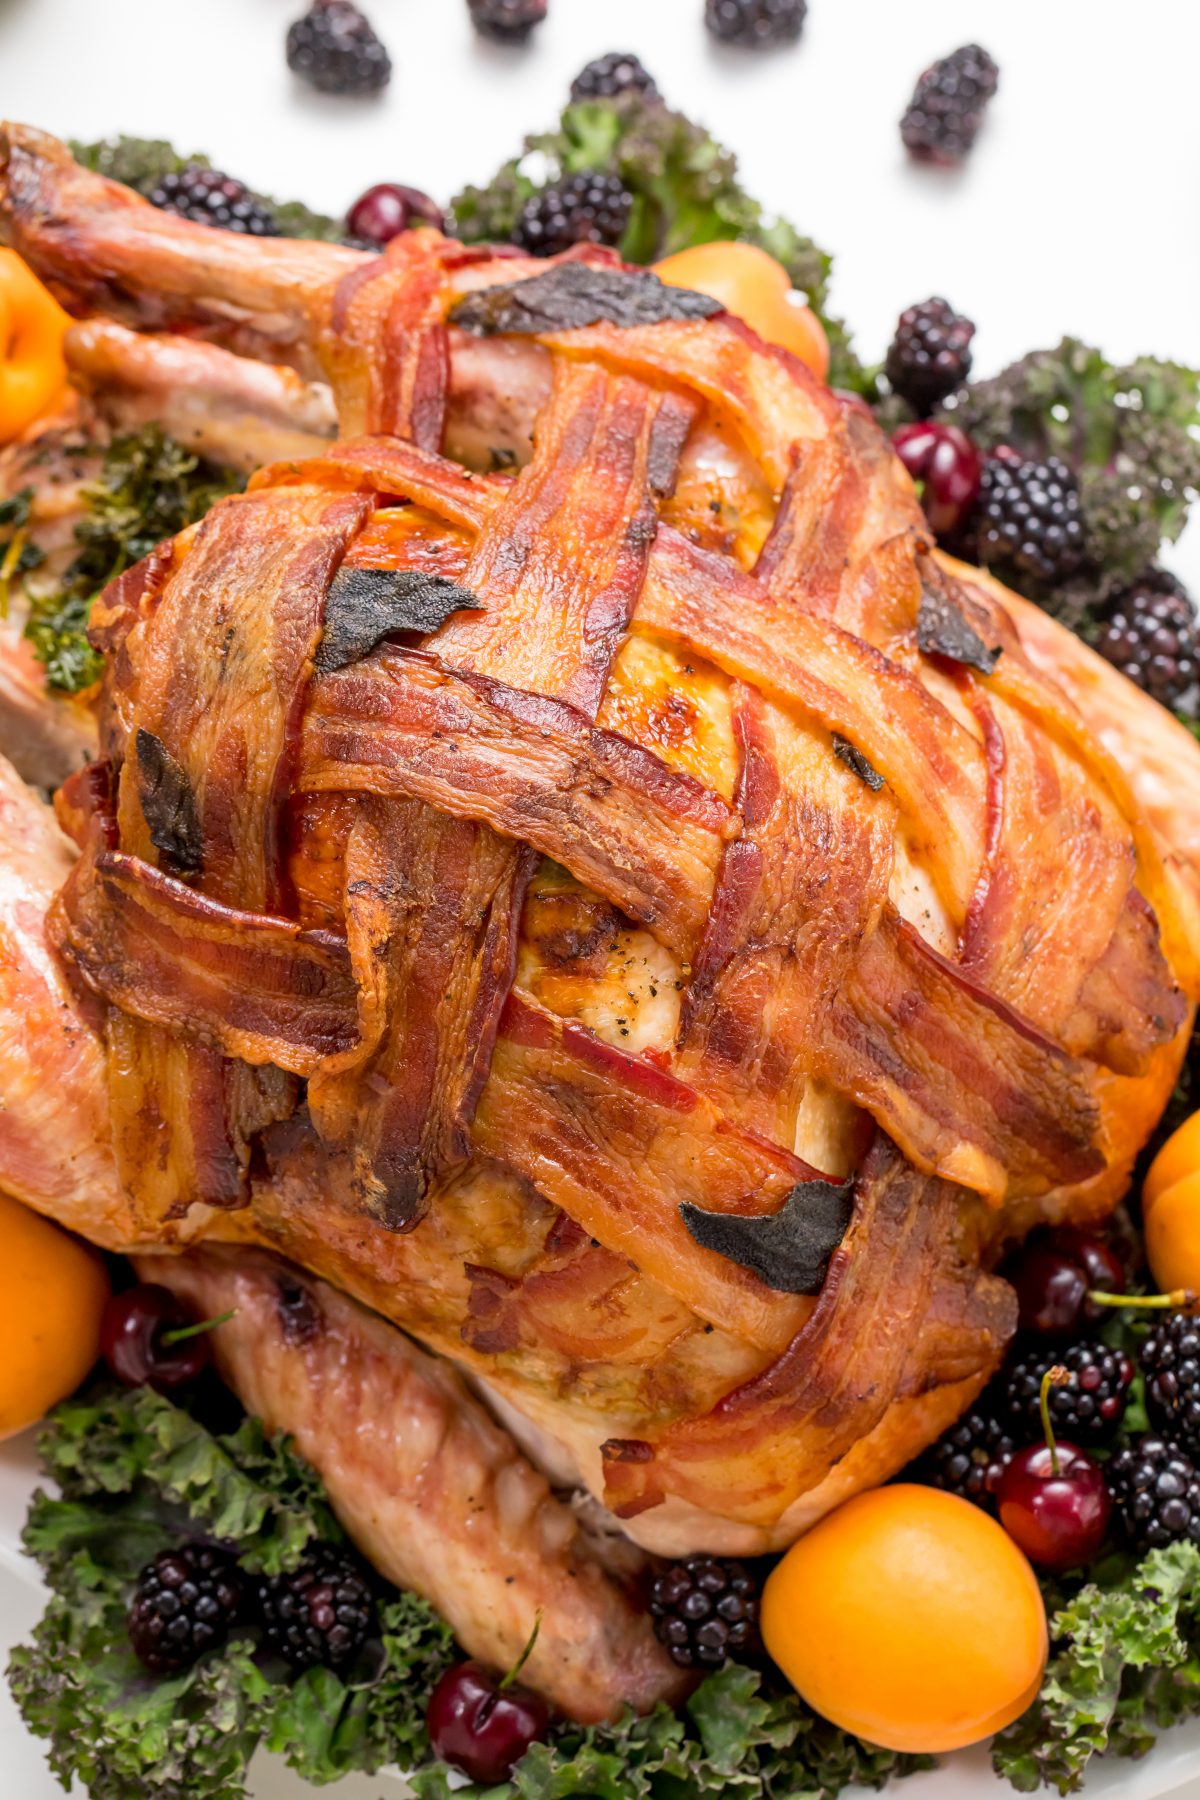 5D4B9743 - Bacon Wrapped Turkey - close-up of cooked bacon wrapped turkey